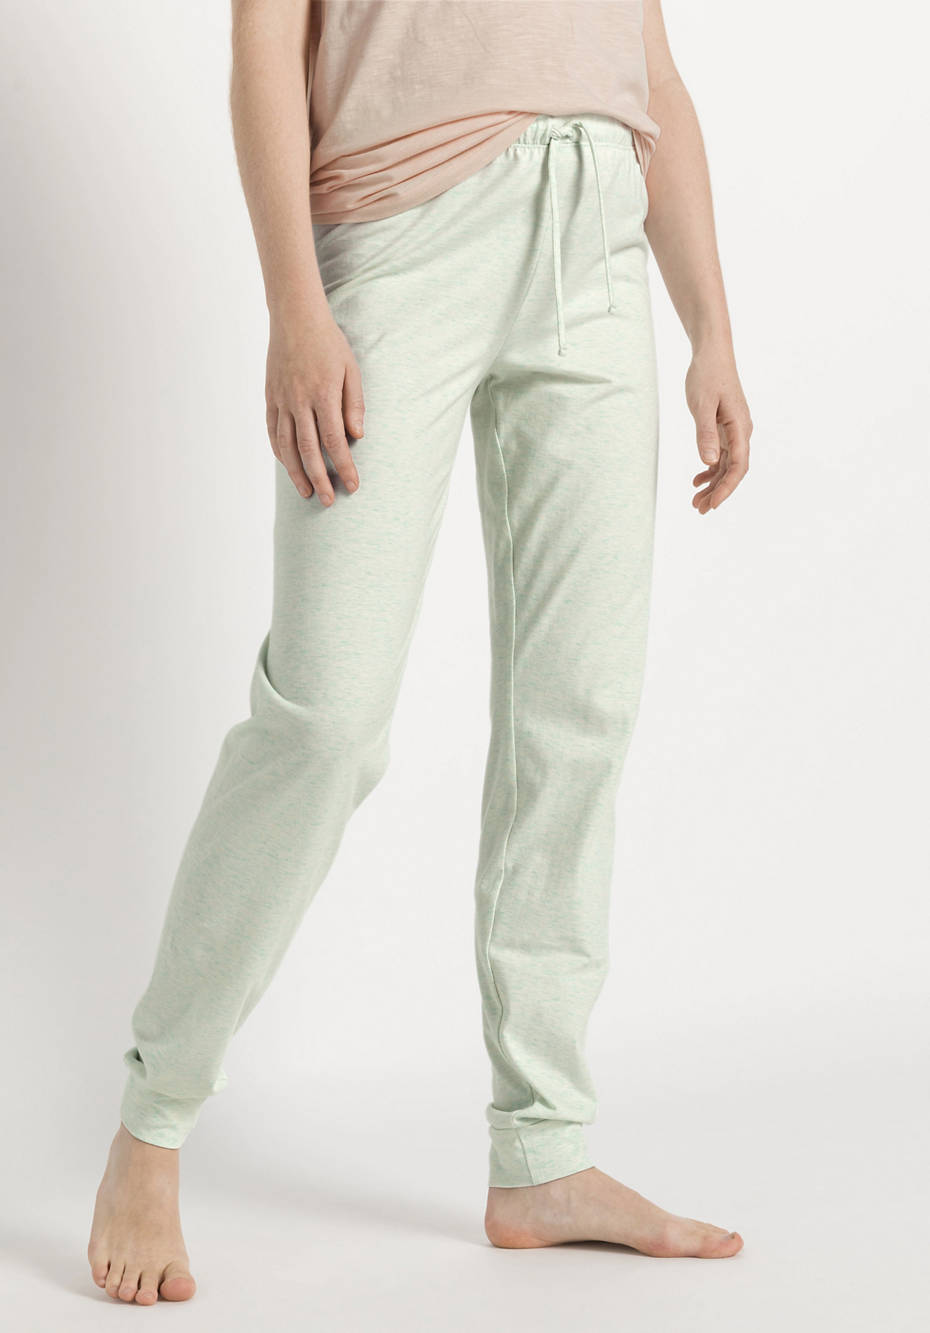 Sleep trousers made from pure organic cotton